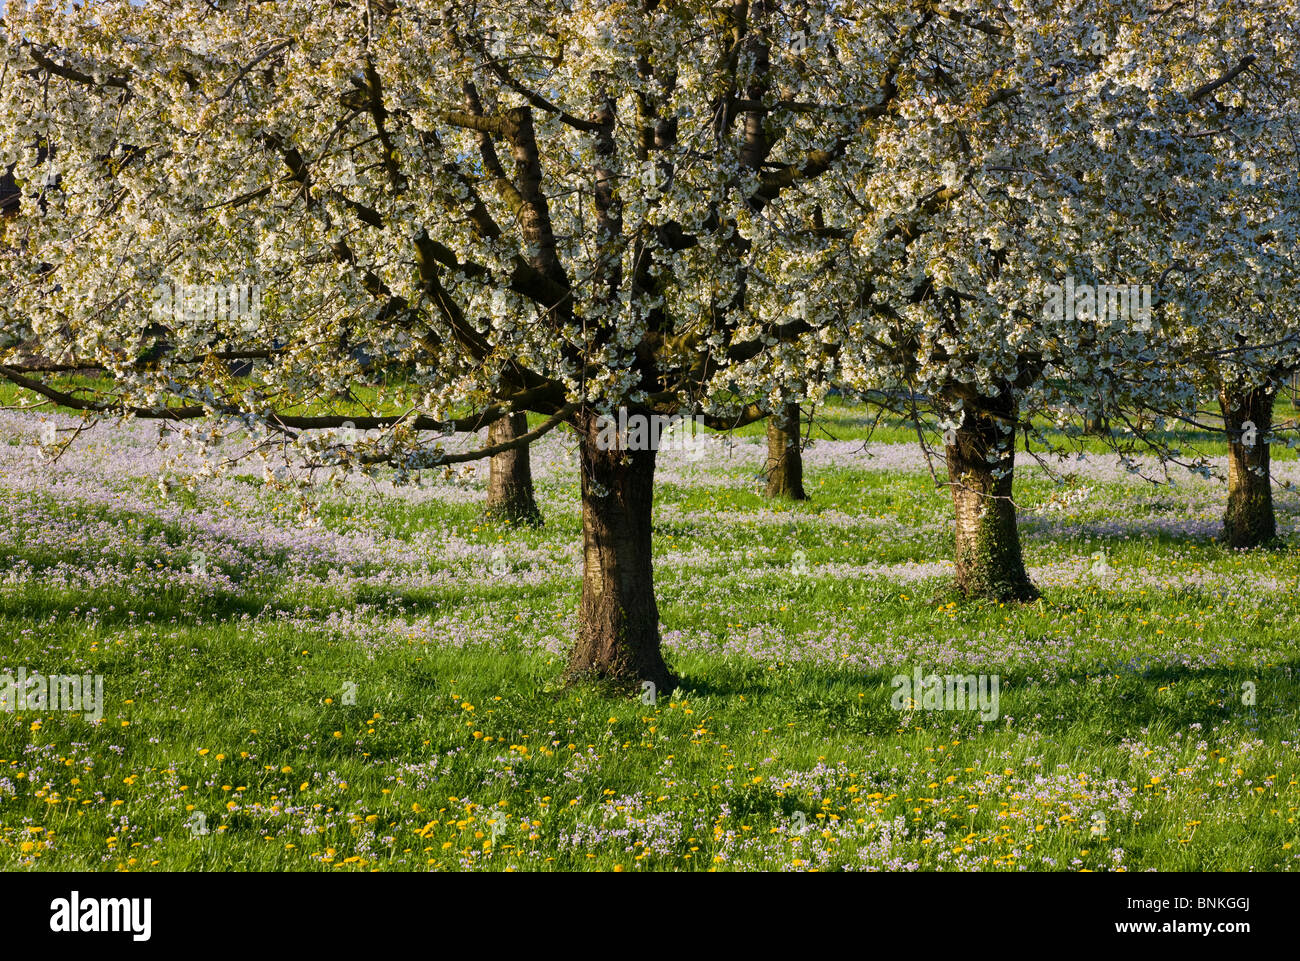 Brook Tü Switzerland canton St. Gallen trees blossoming cherry trees blossoms flourishes meadow flowers lady's smock spring Stock Photo